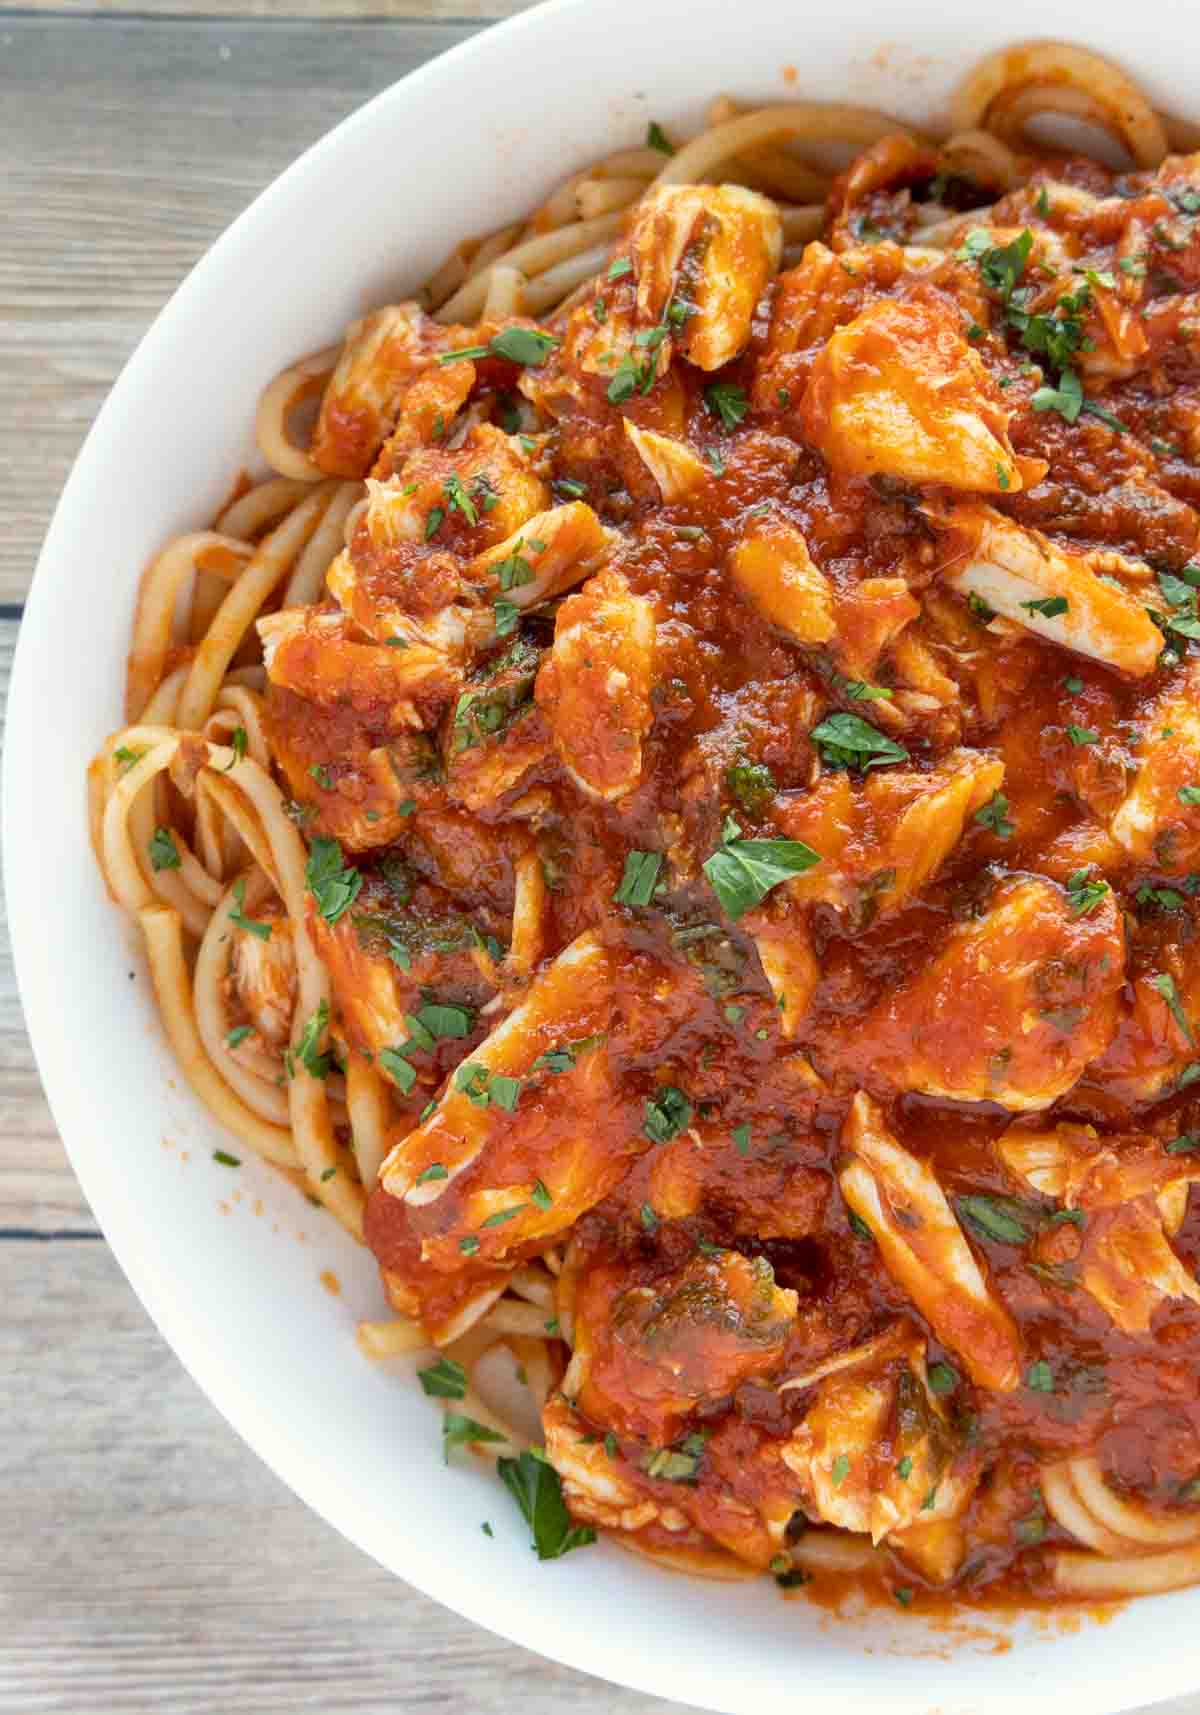 pasta with red crab sauce in a white bowl